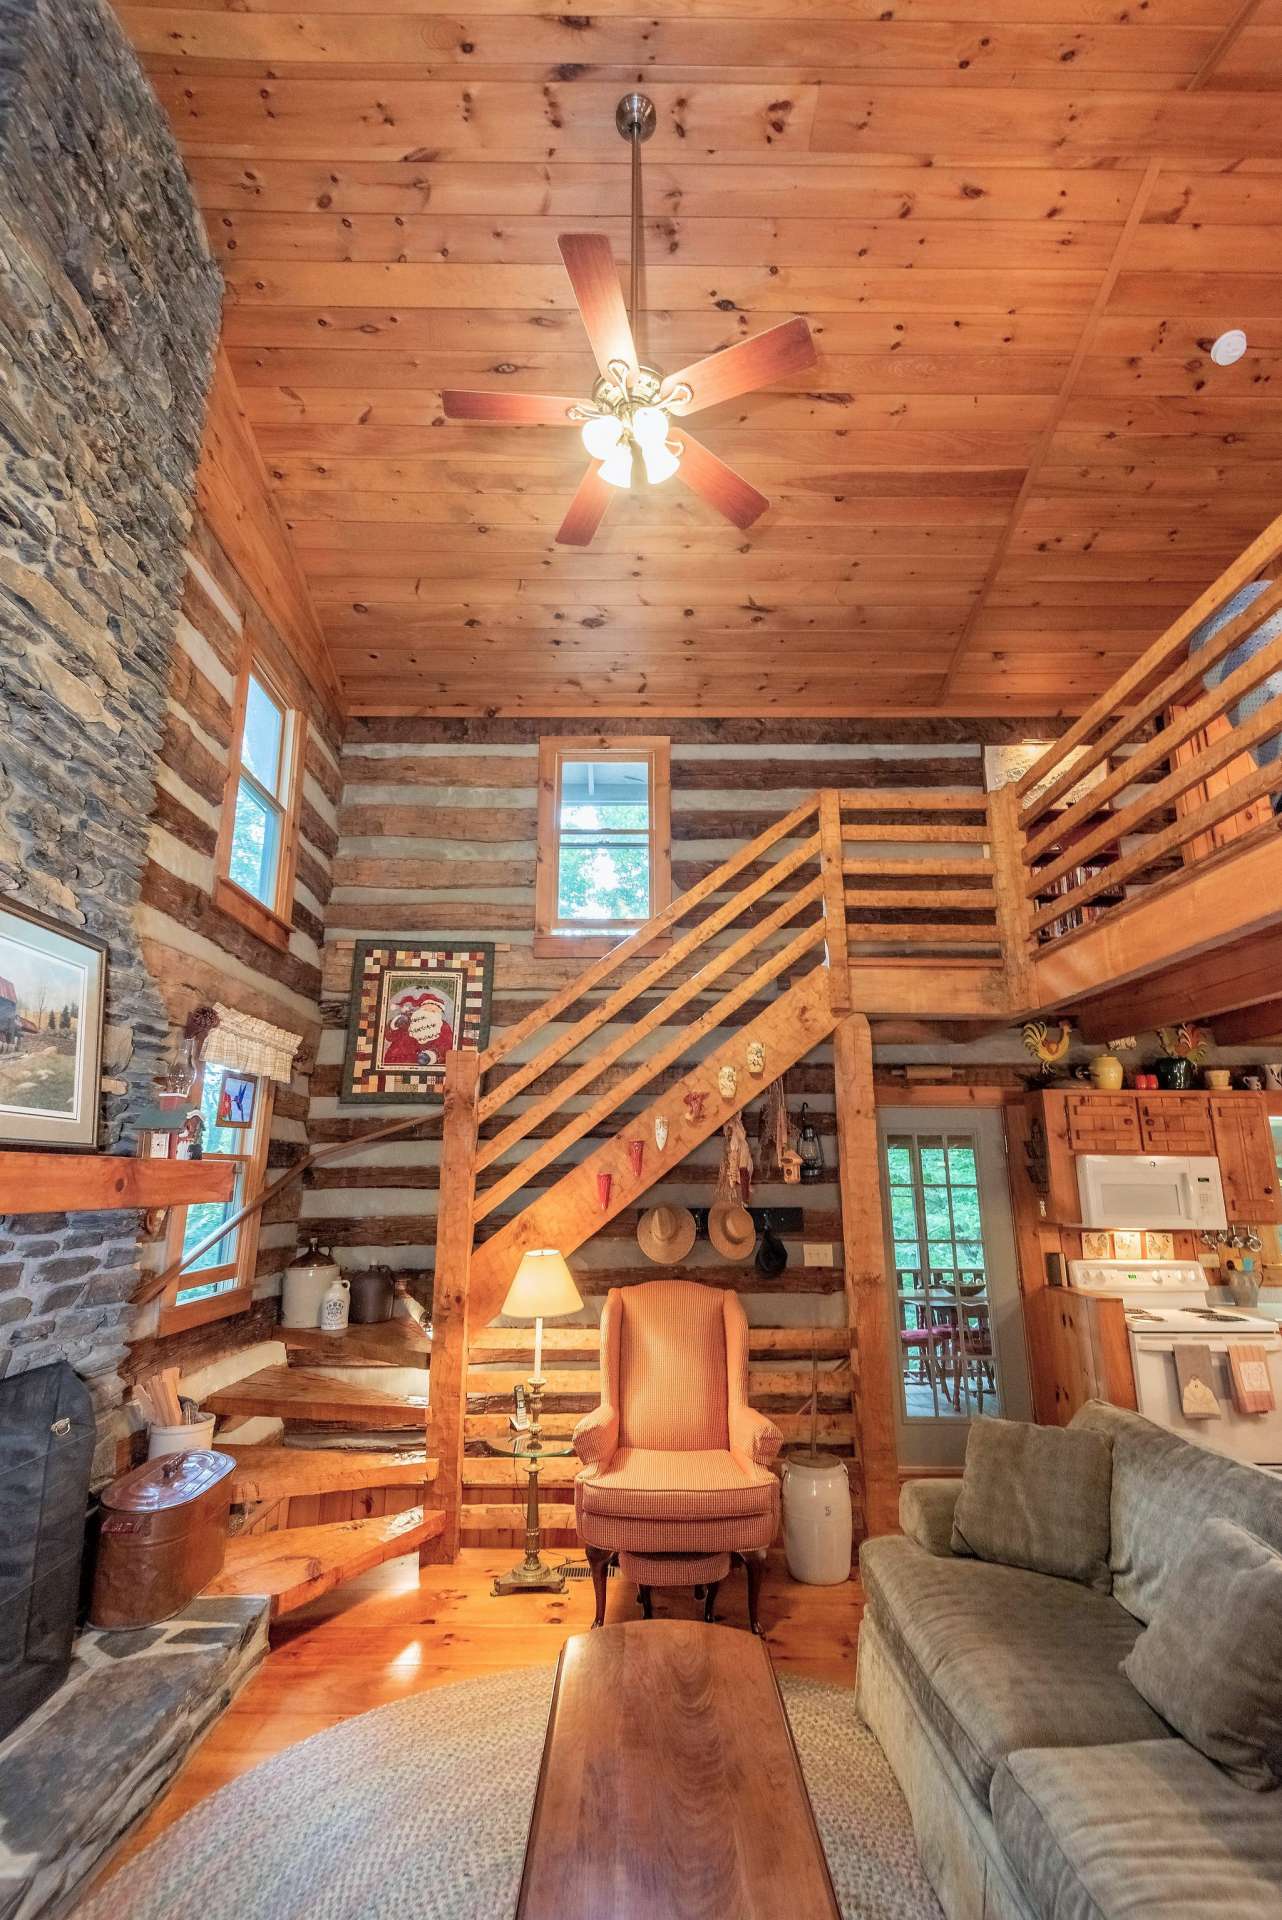 The rustic hand-hewn staircase leads up to the loft area and also leads down to a finished lower level.